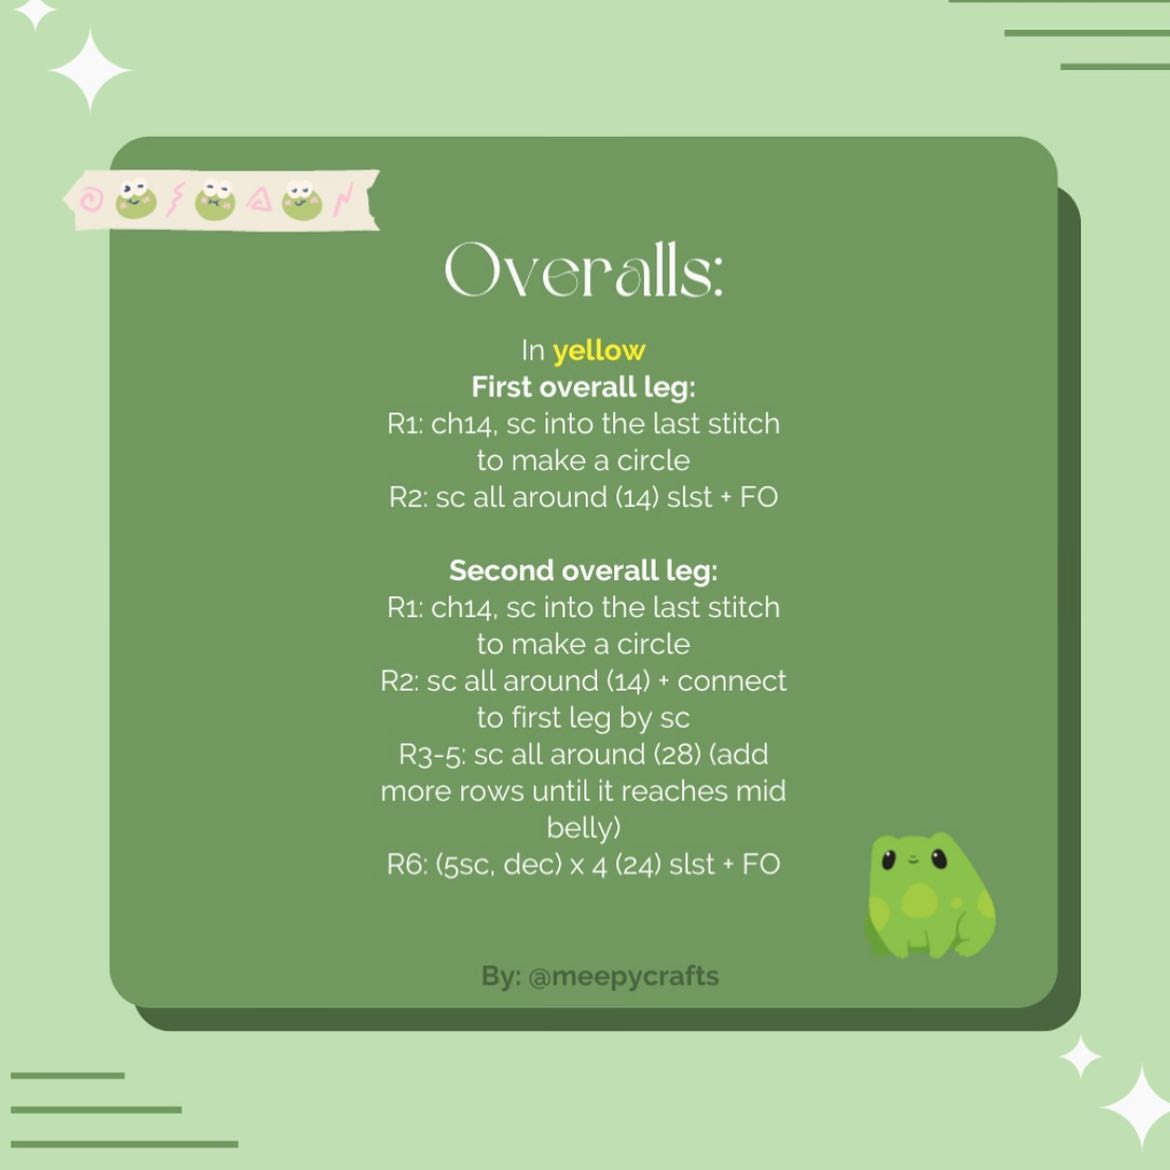 Green frog, pink cheeks, blue overalls